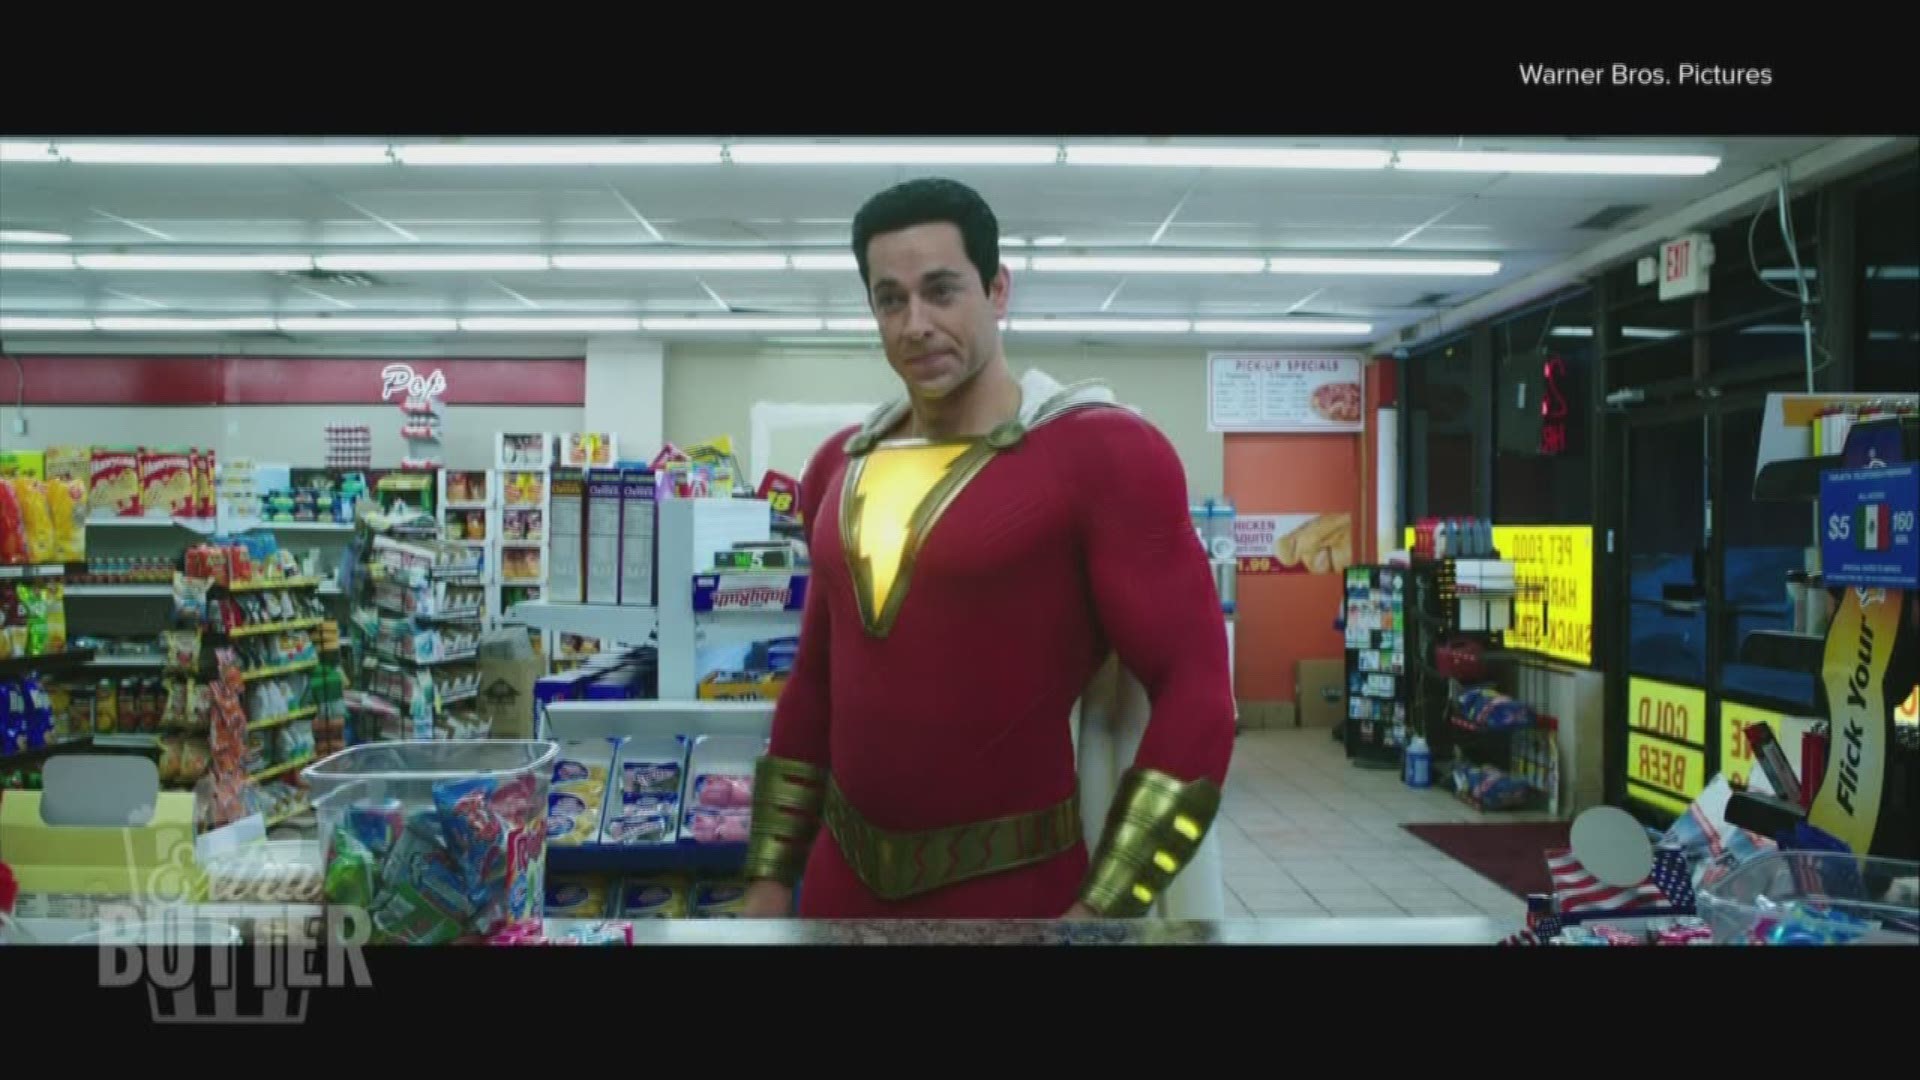 If you are looking for something to watch at home, Extra Butter recommends 'Shazam!' Mark S. Allenb talks with star Zachary Levi about why this is his dream role.